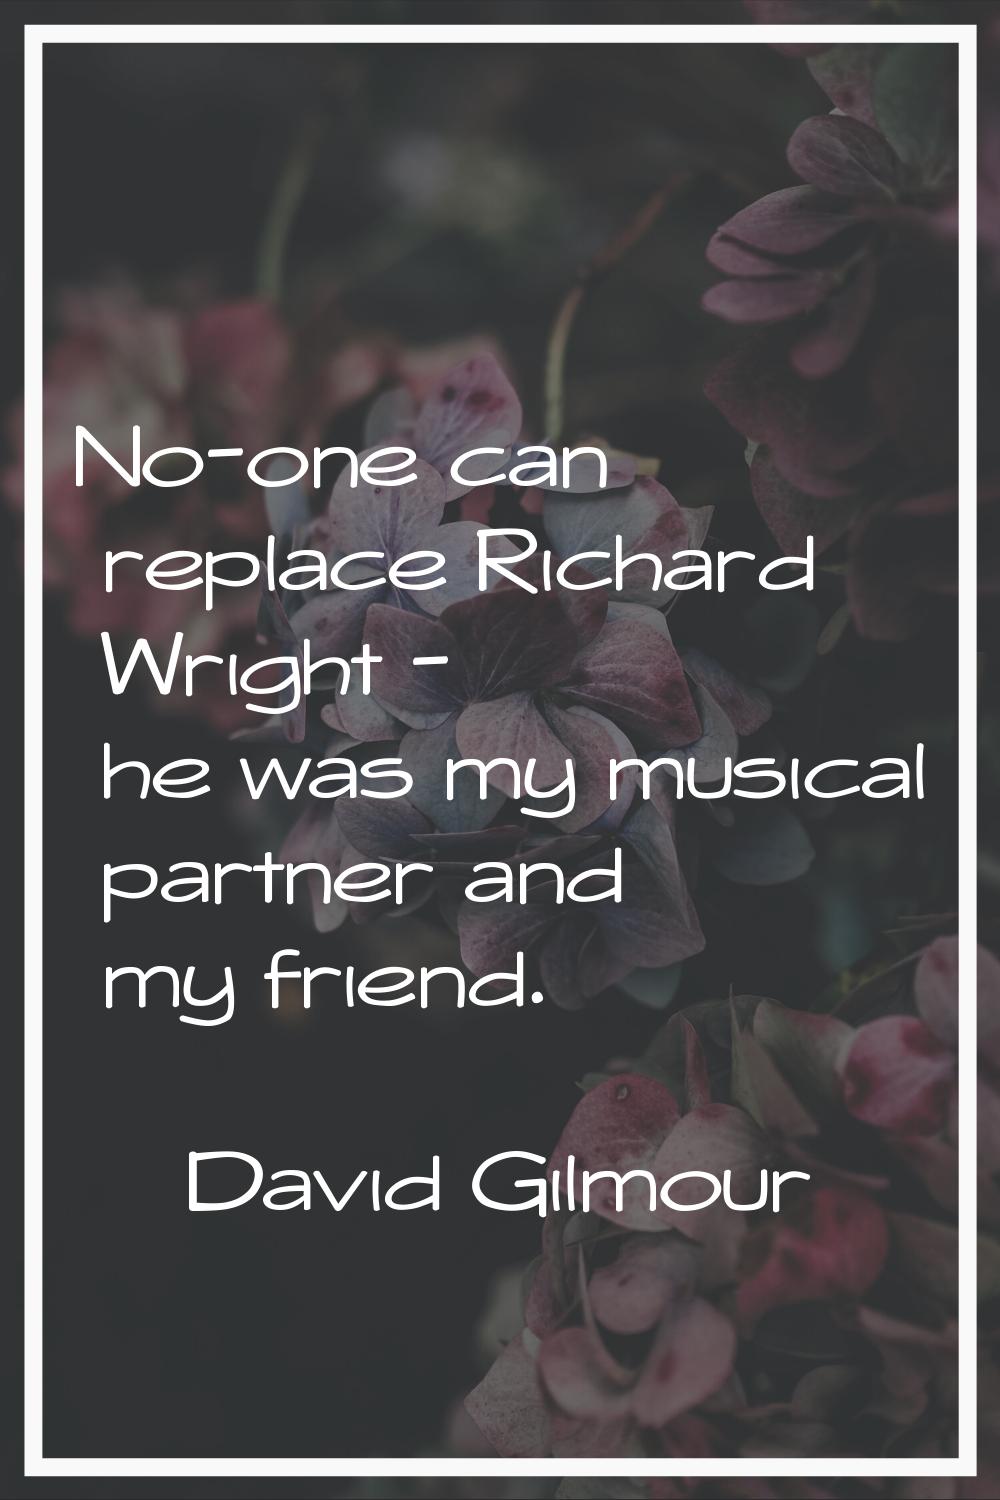 No-one can replace Richard Wright - he was my musical partner and my friend.